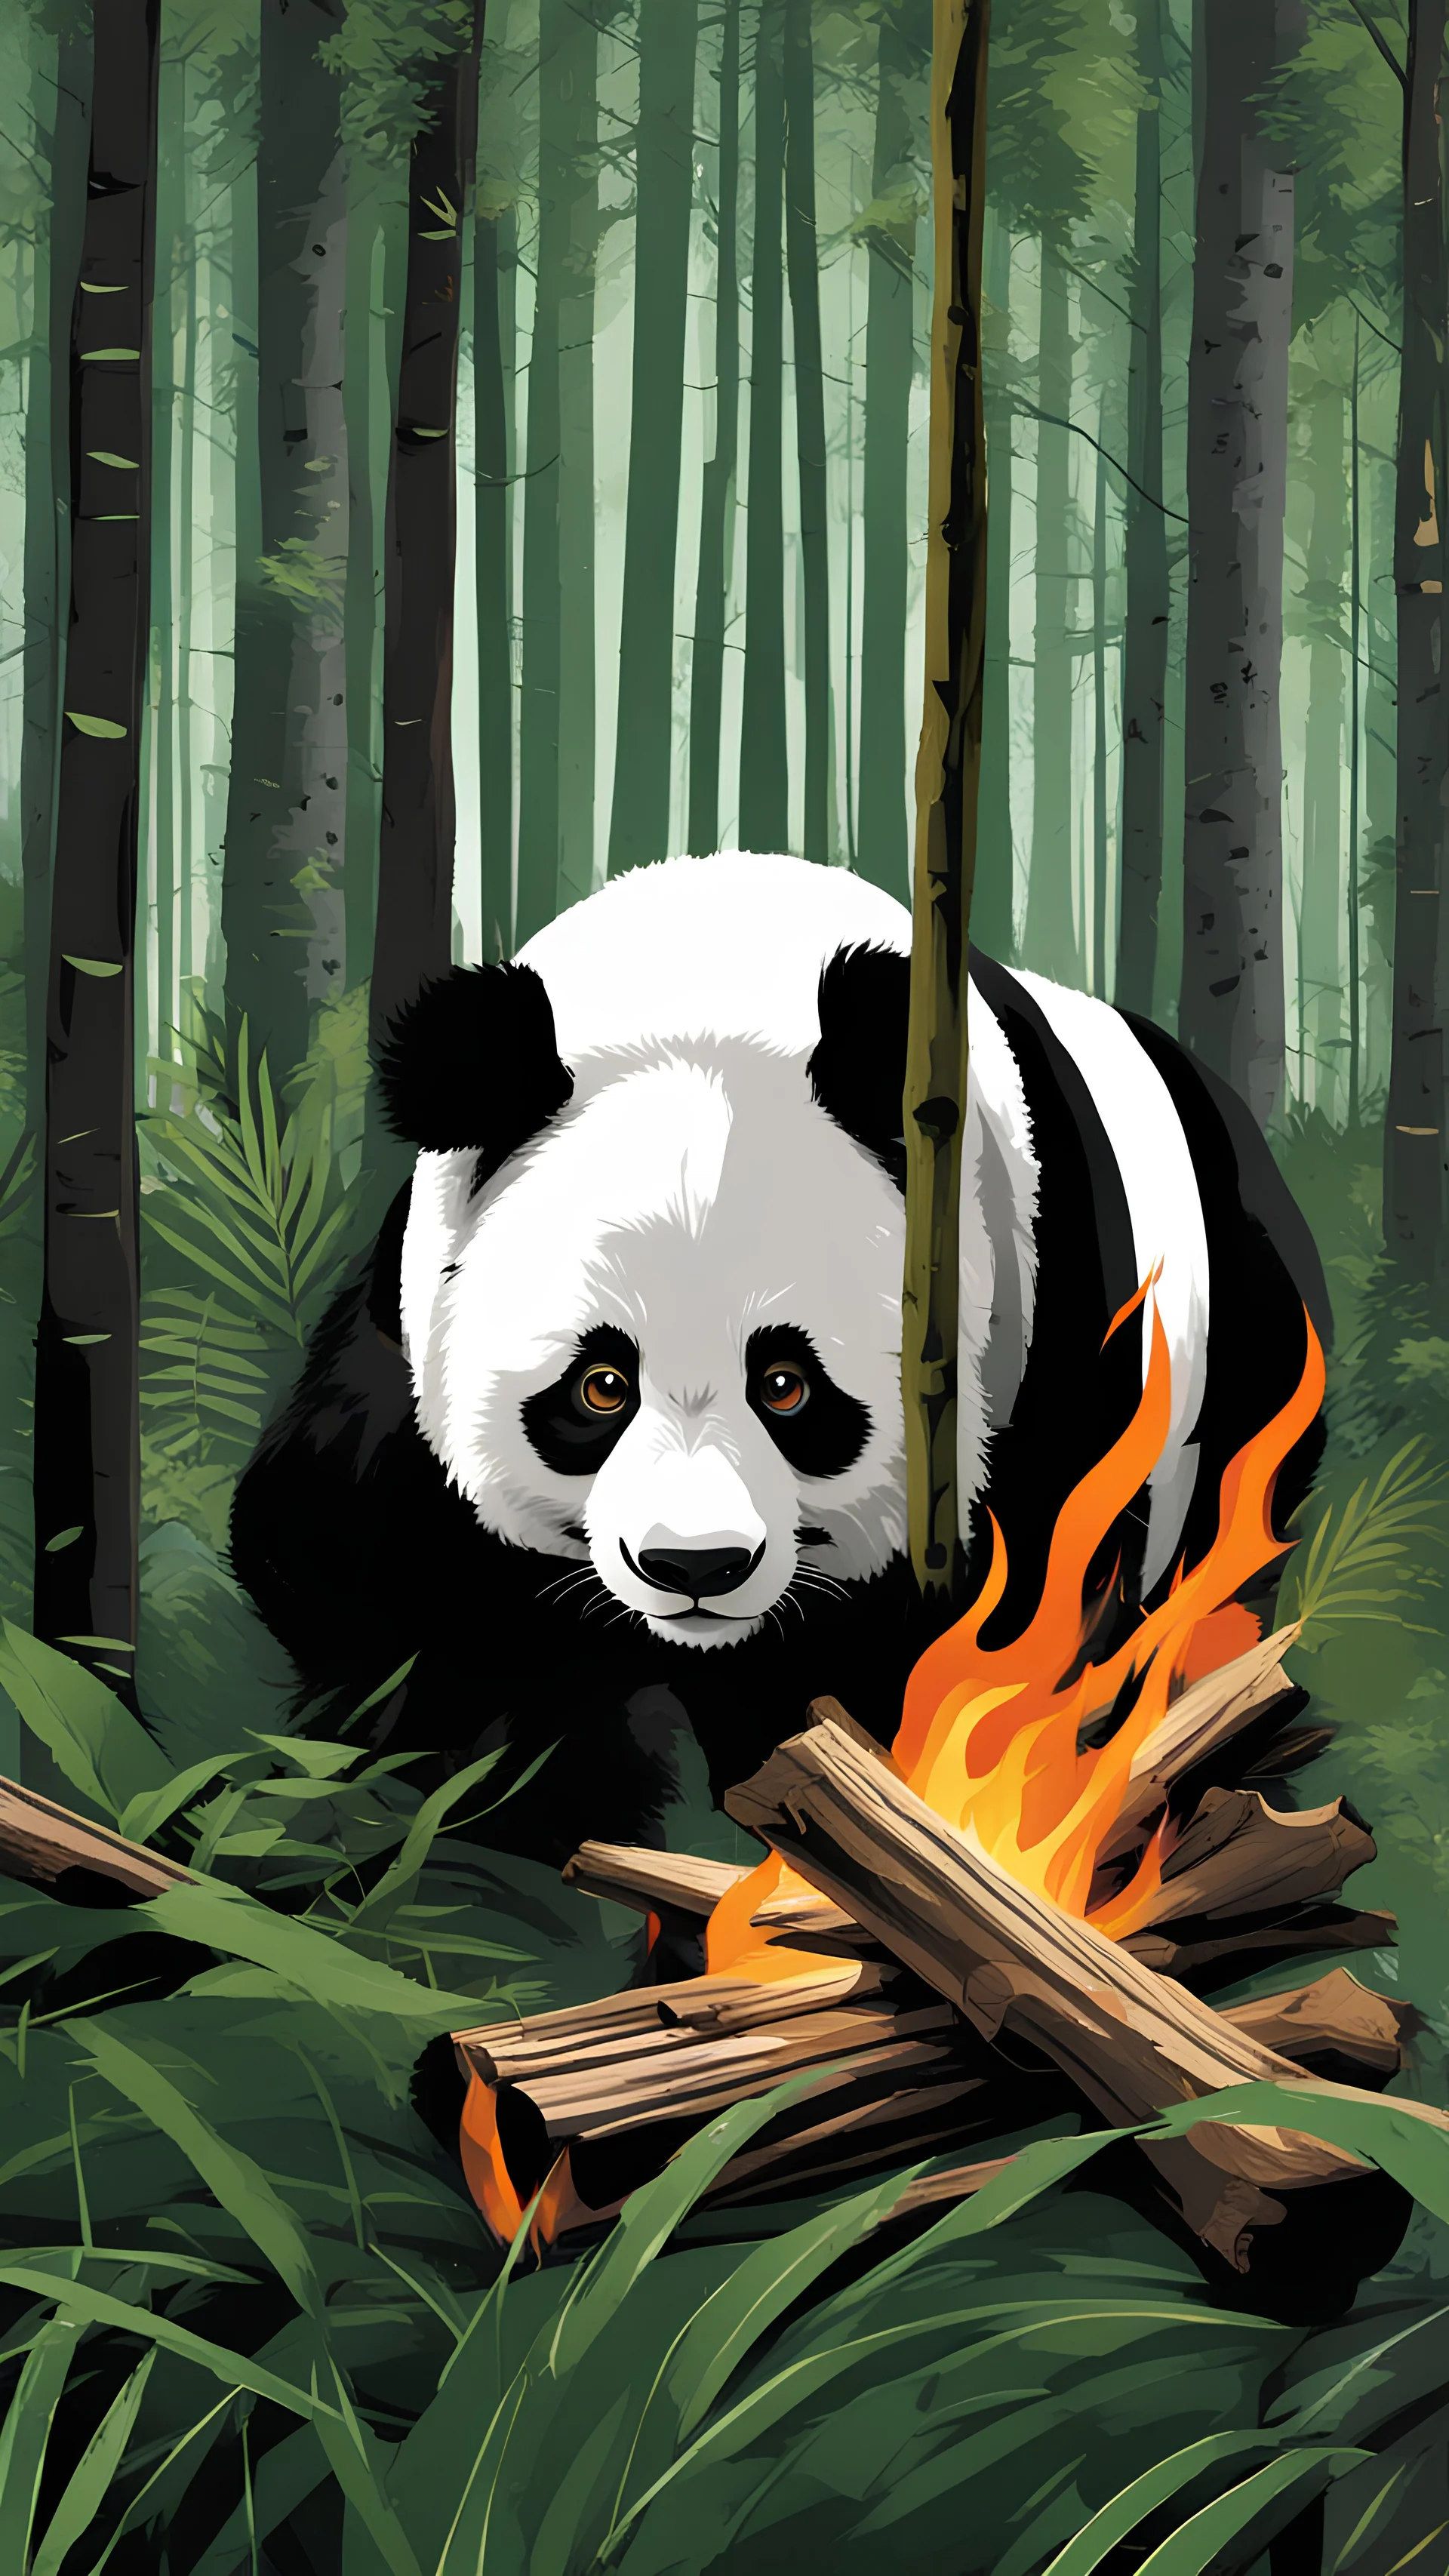 A Panda in the Forrest ,His eyes reflects a burning wood